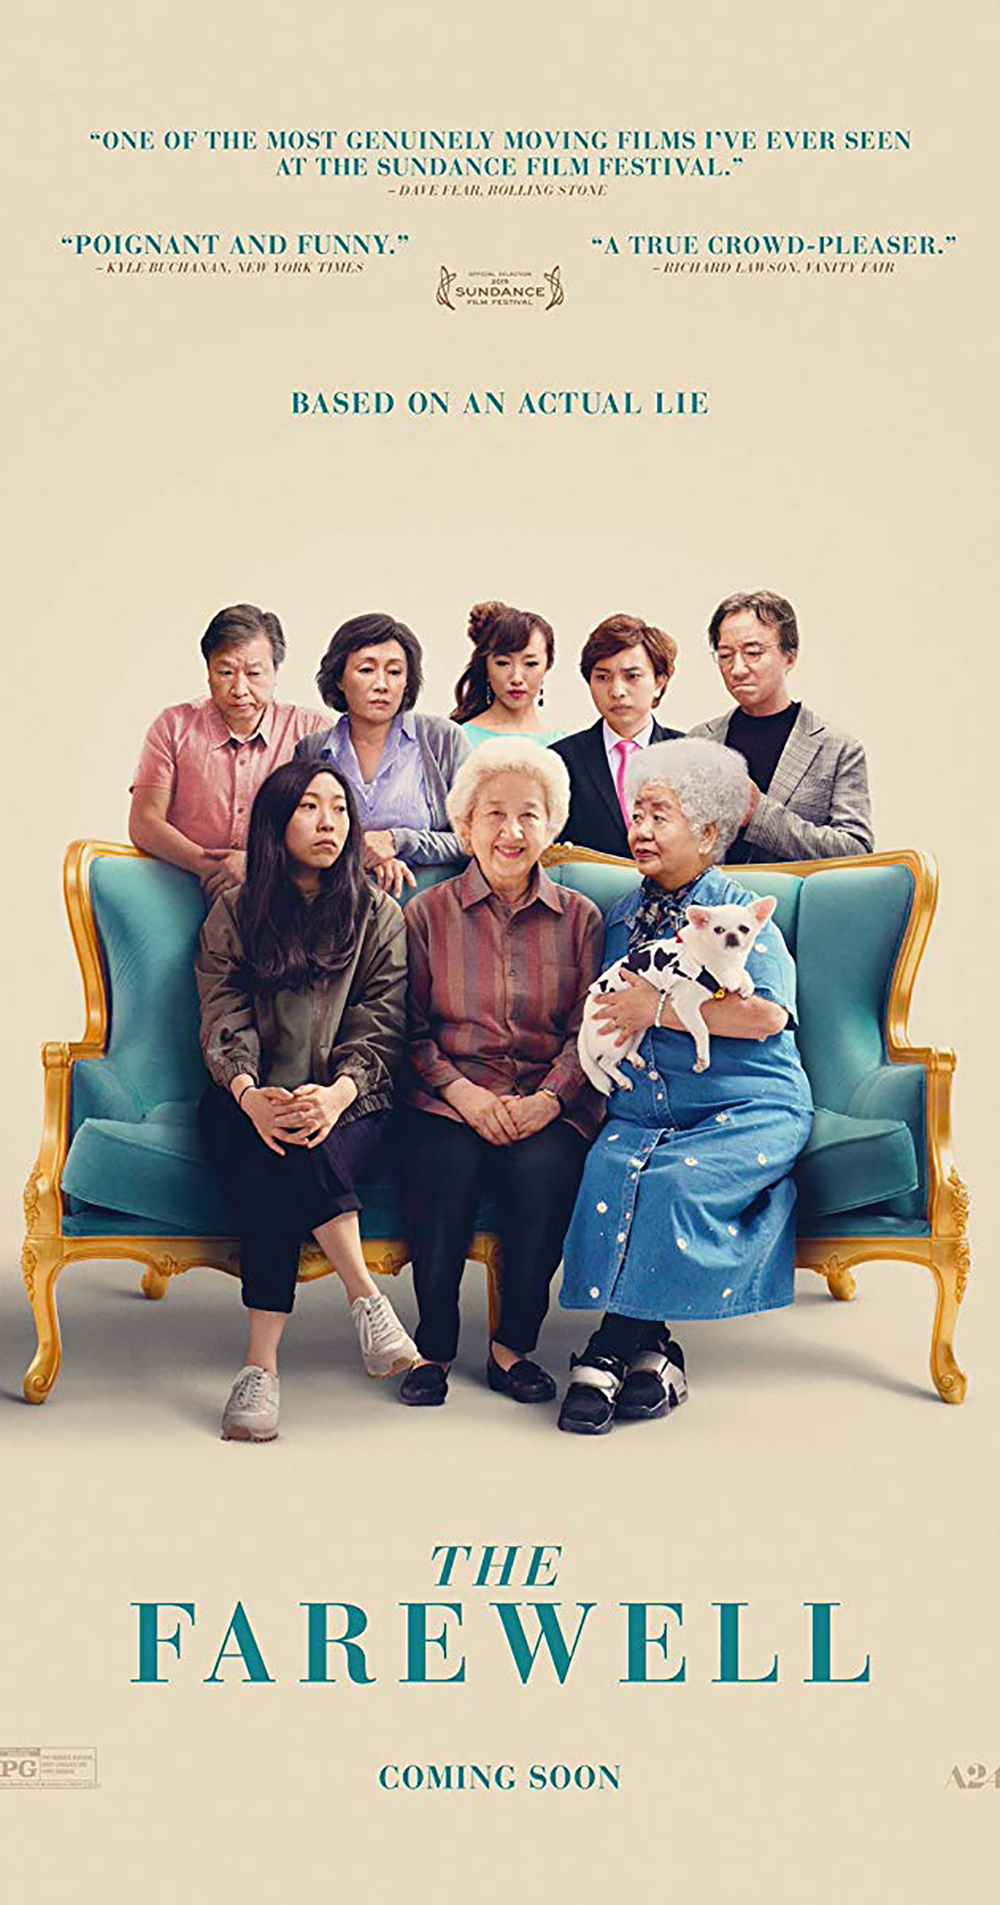 Go see Lulu Wang's new film, The Farewell, based on a real life story.